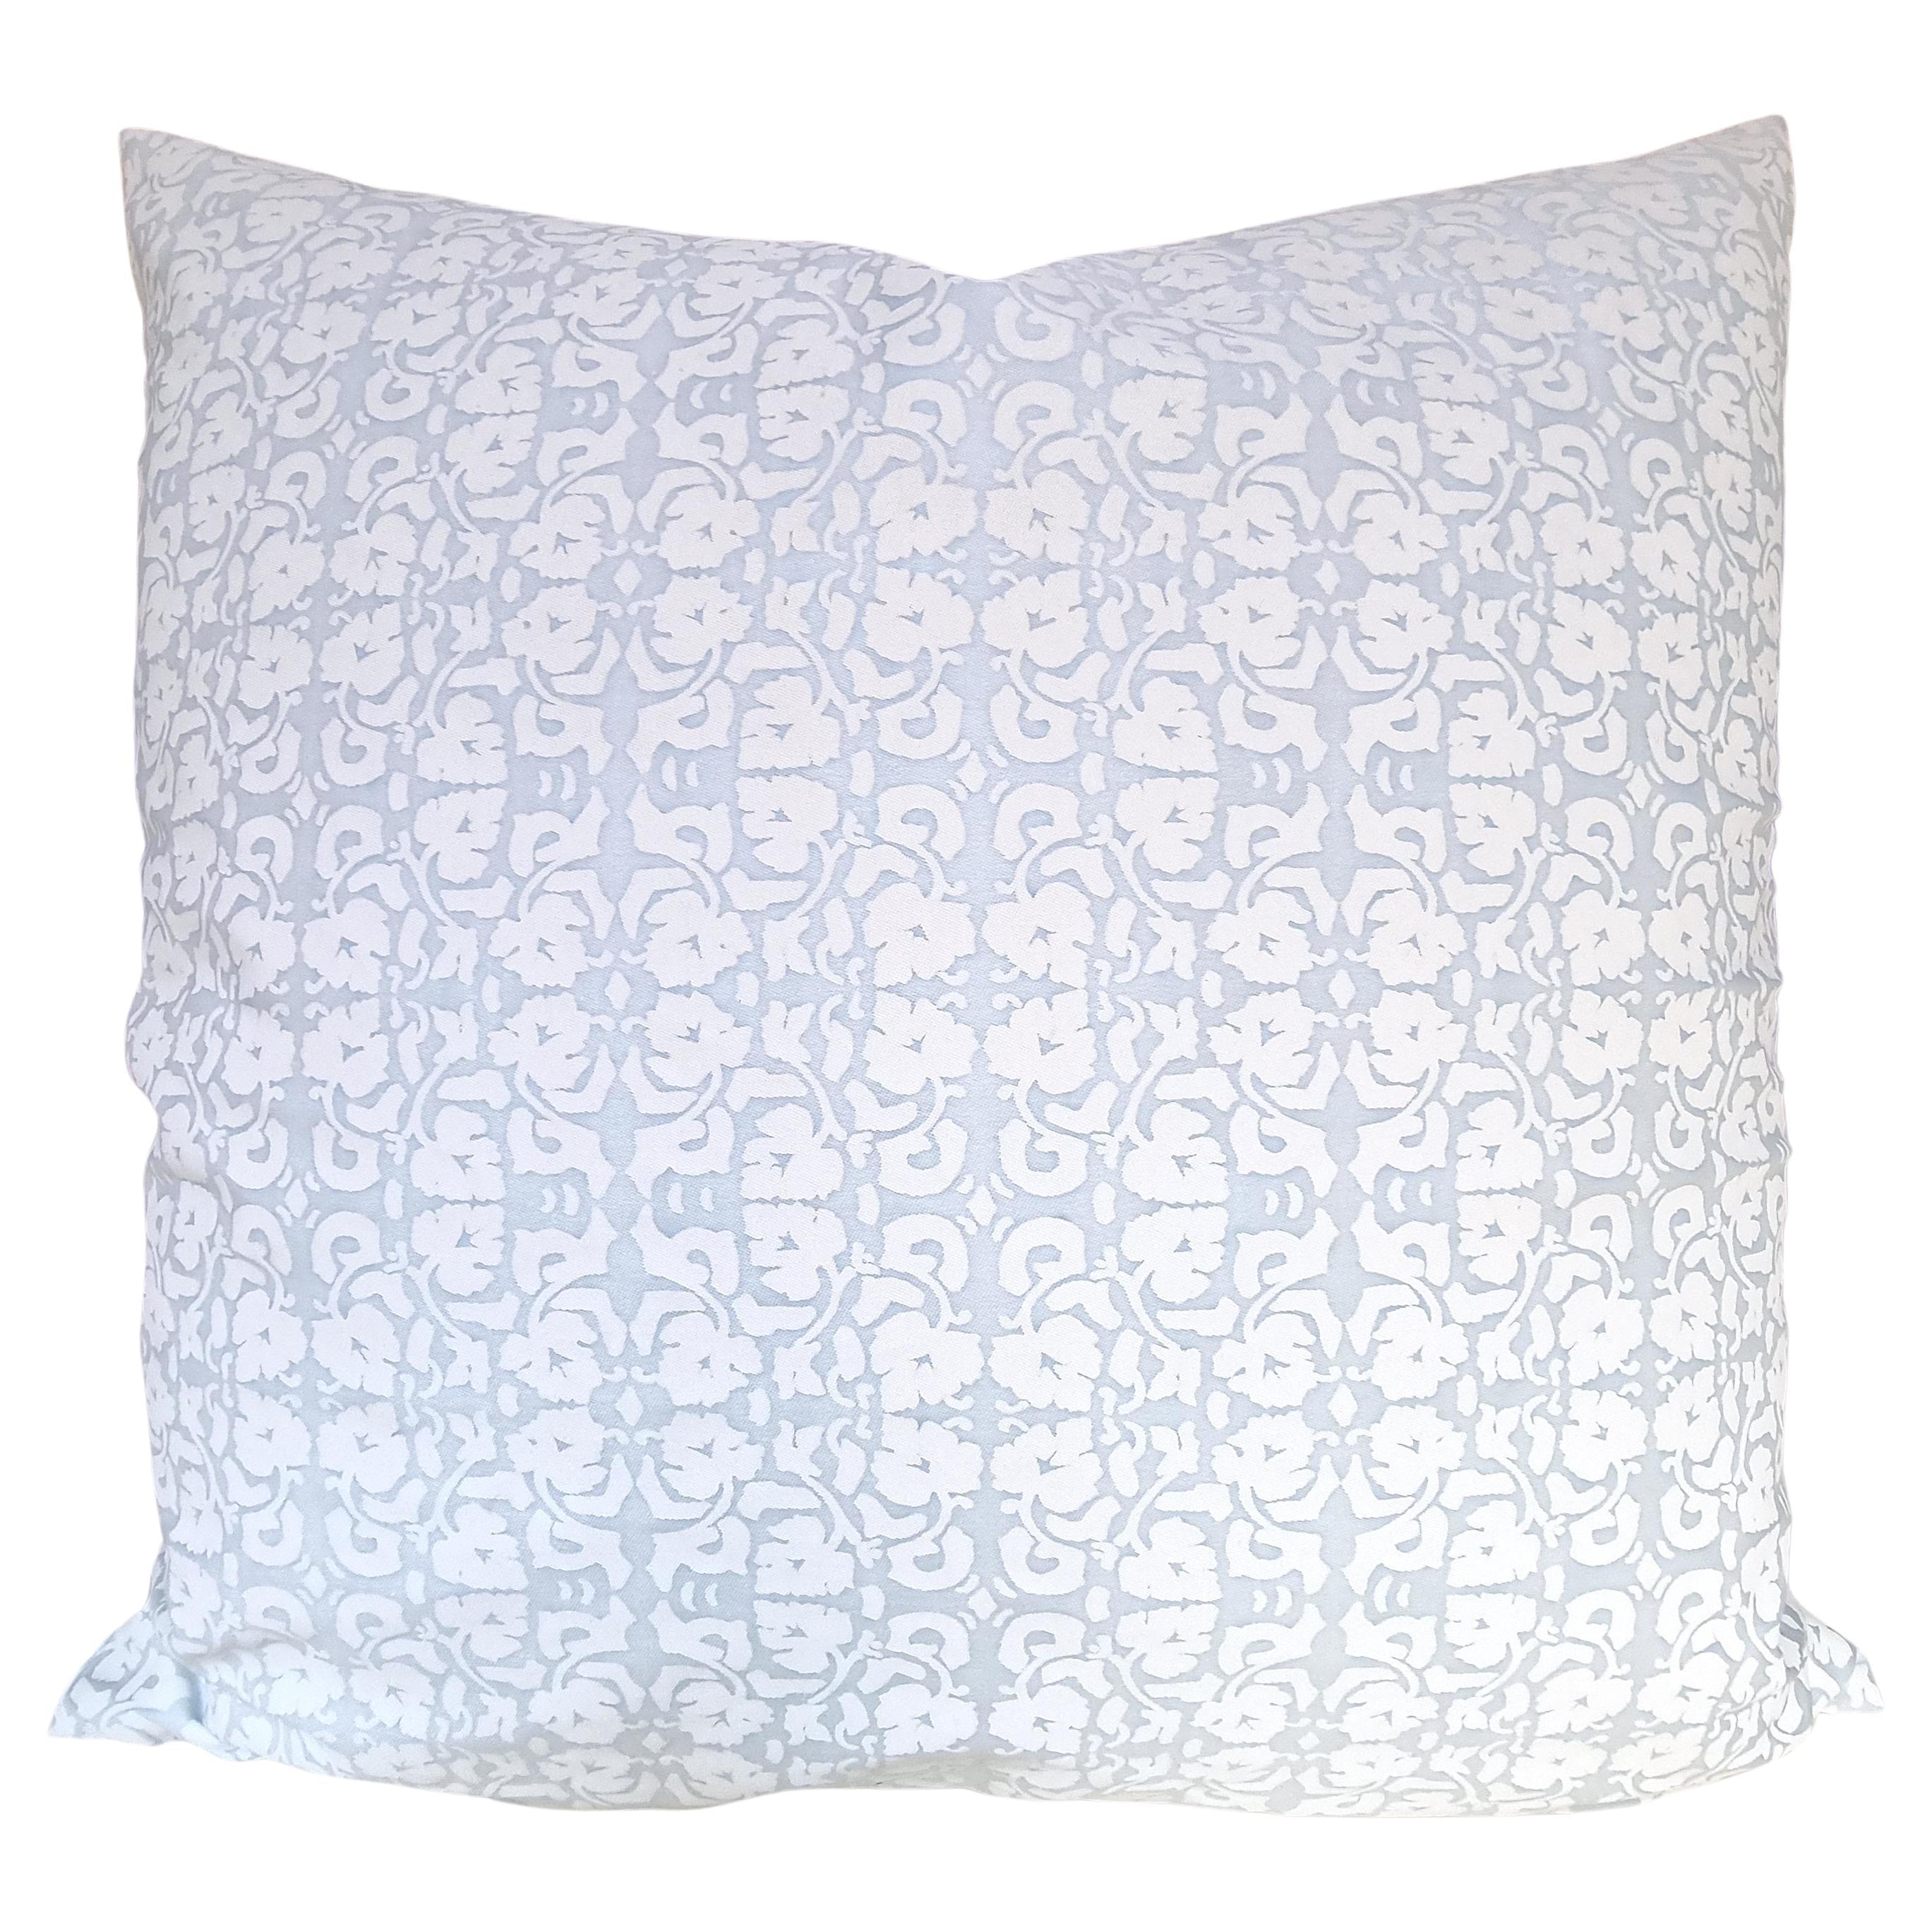 Double Sided Fortuny Fabric Throw Pillow Shiraz Powder Blue & White For Sale